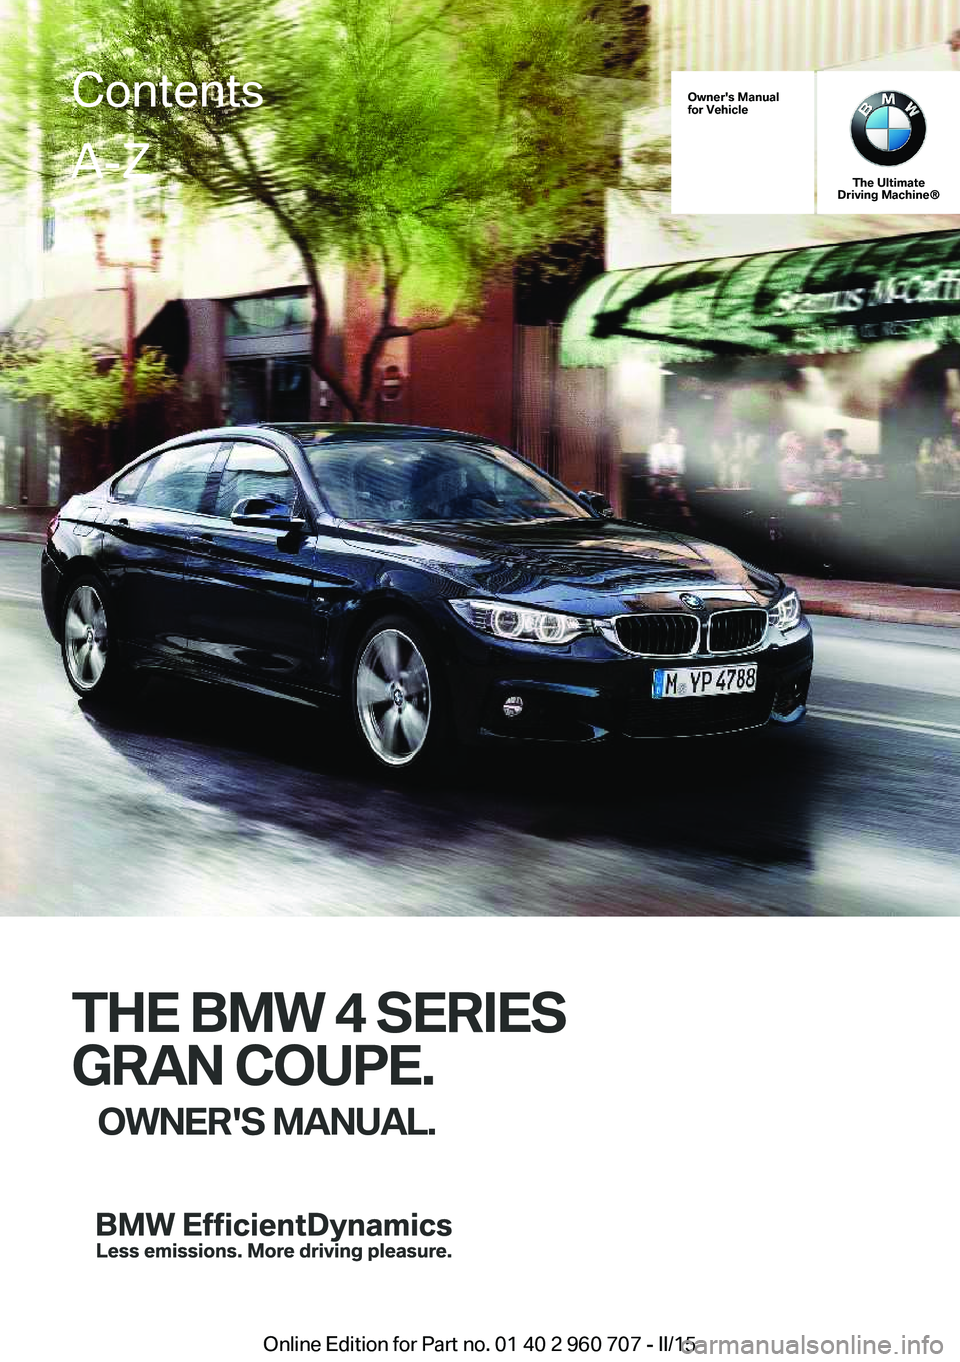 BMW 428I XDRIVE  GRAN COUPE 2016  Owners Manual Owner's Manual
for Vehicle
The Ultimate
Driving Machine®
THE BMW 4 SERIES
GRAN COUPE. OWNER'S MANUAL.
ContentsA-Z
Online Edition for Part no. 01 40 2 960 707 - II/15   